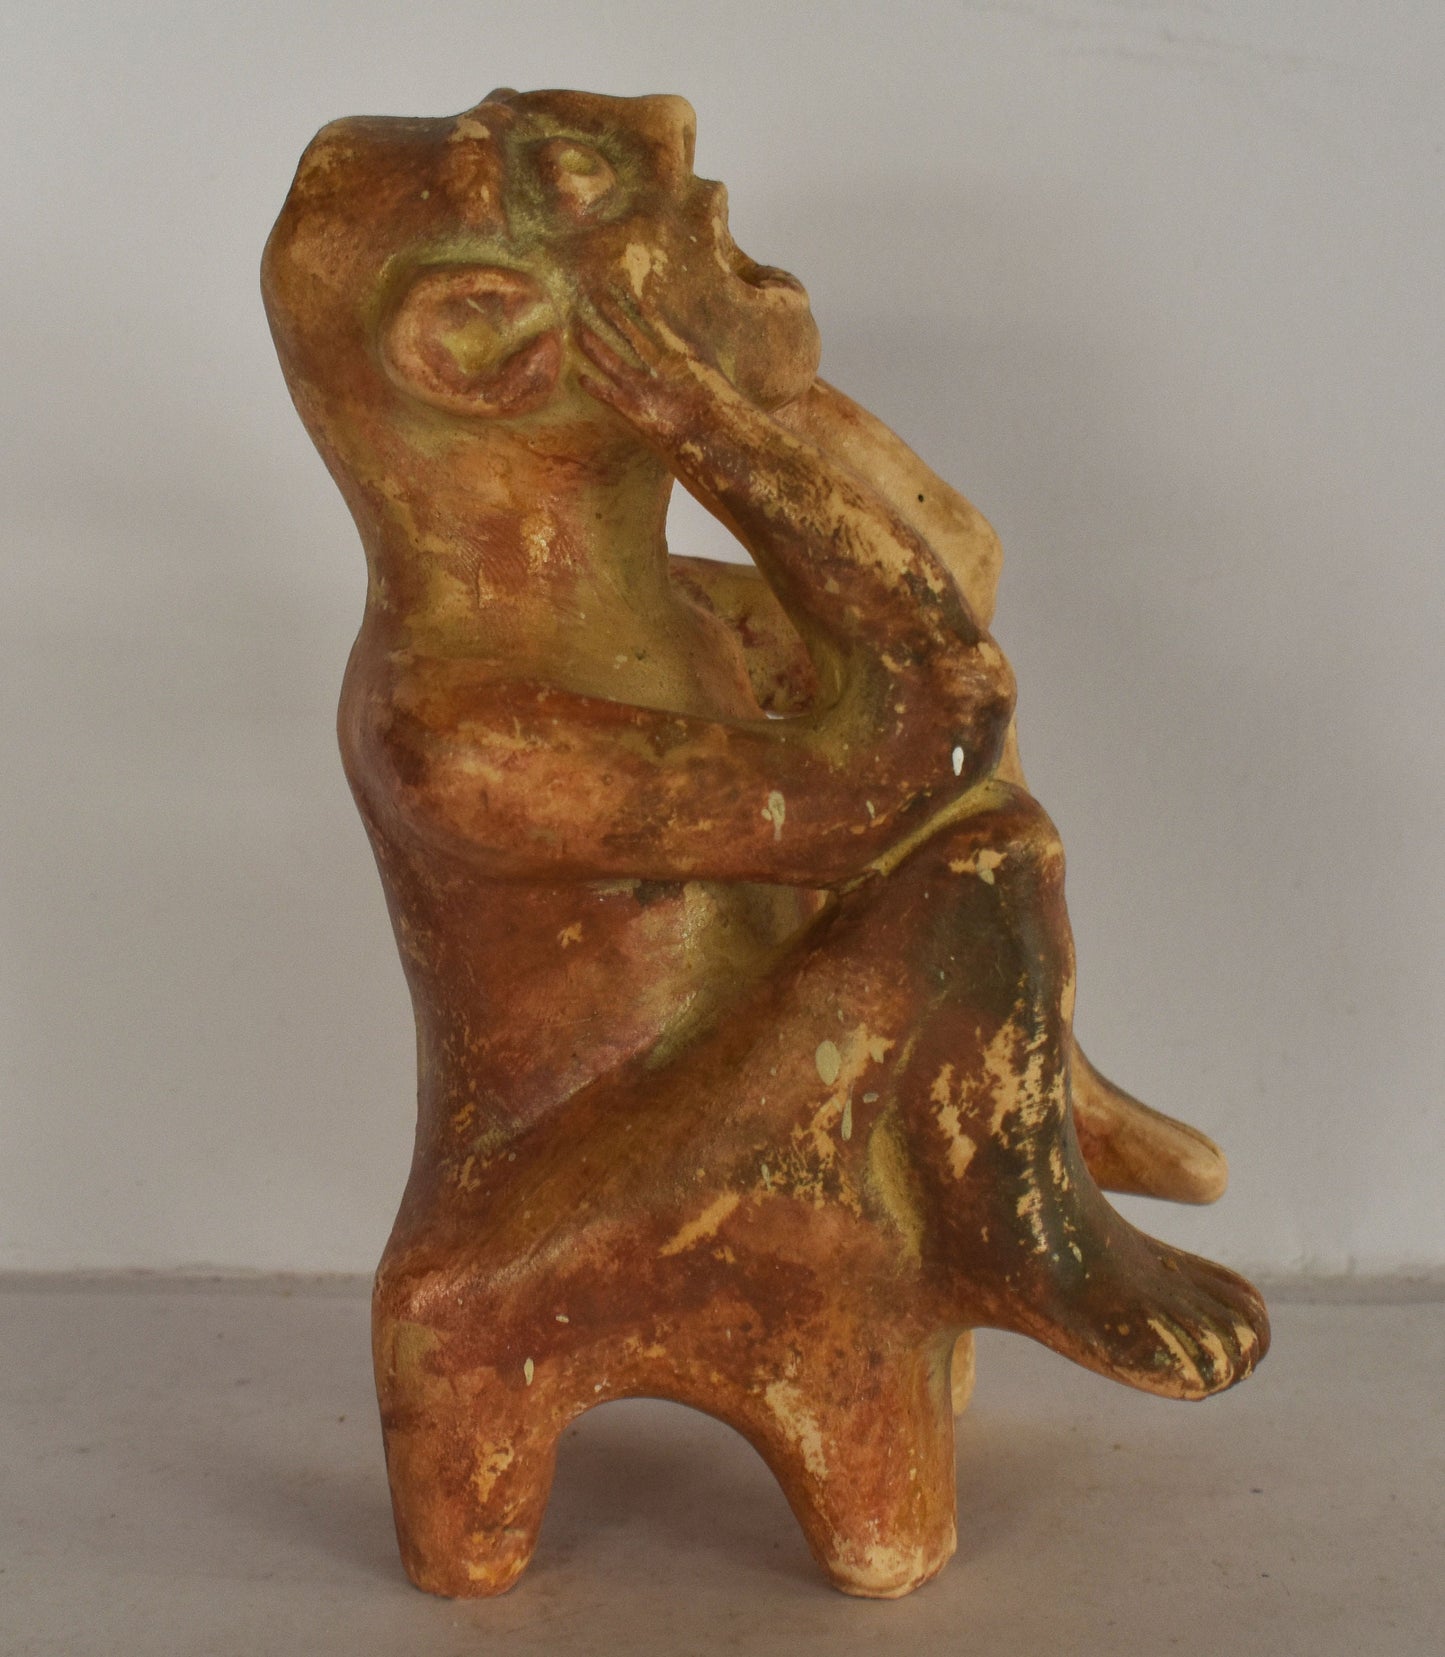 Terracotta Figurine of a Sitting Man - Chalcolithic Period - Pierides Foundation Museum, Larnaka, Cyprus - Reproduction  - Ceramic Artifact